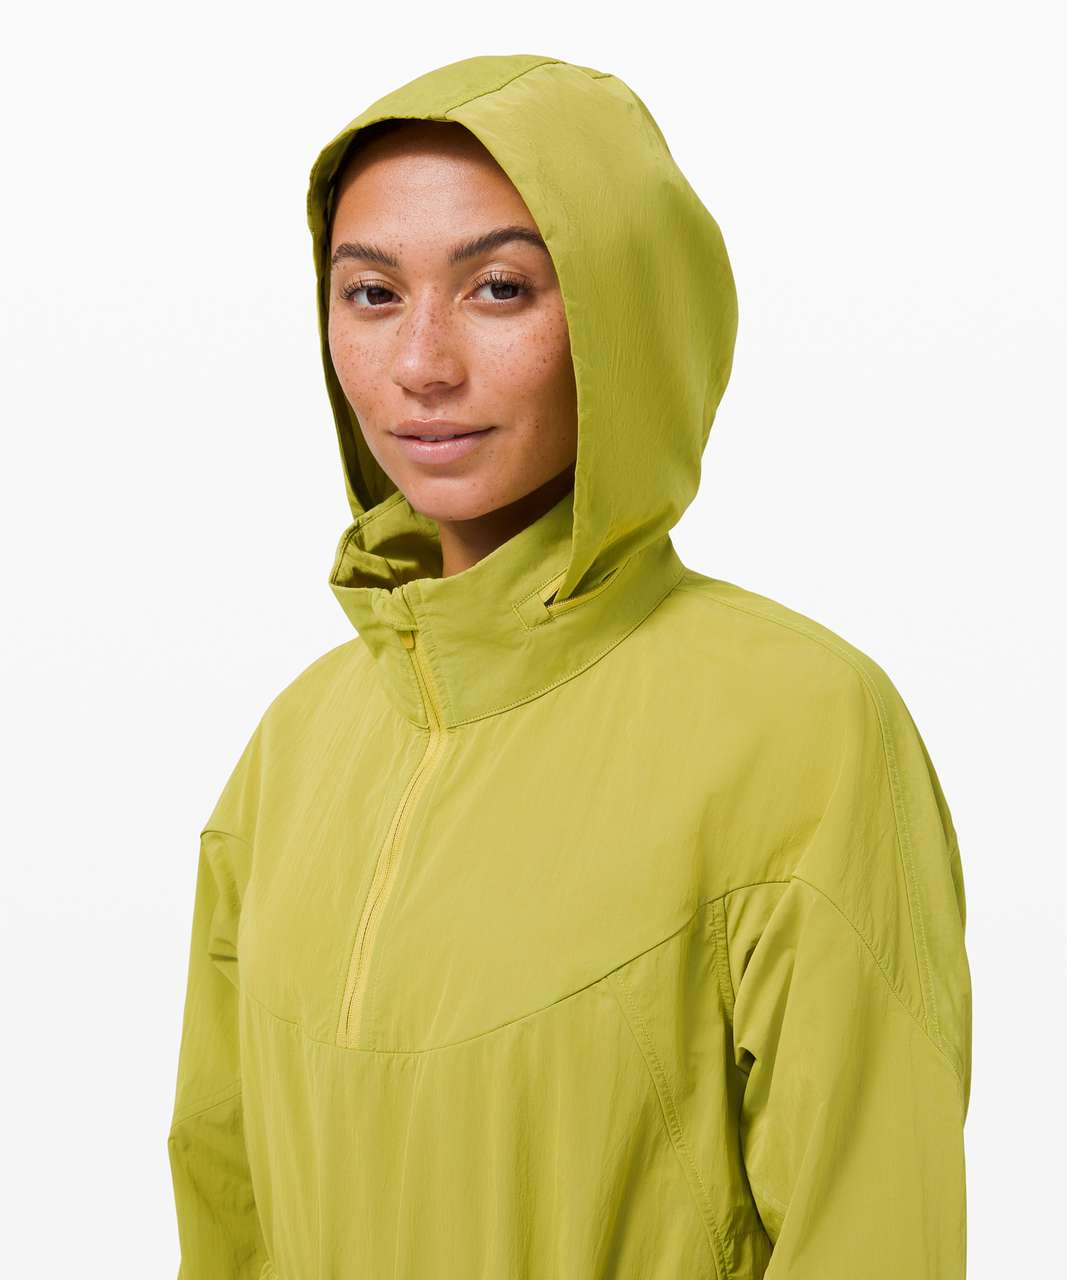 This $158 Lululemon jacket is 'perfect' for weird fall weather